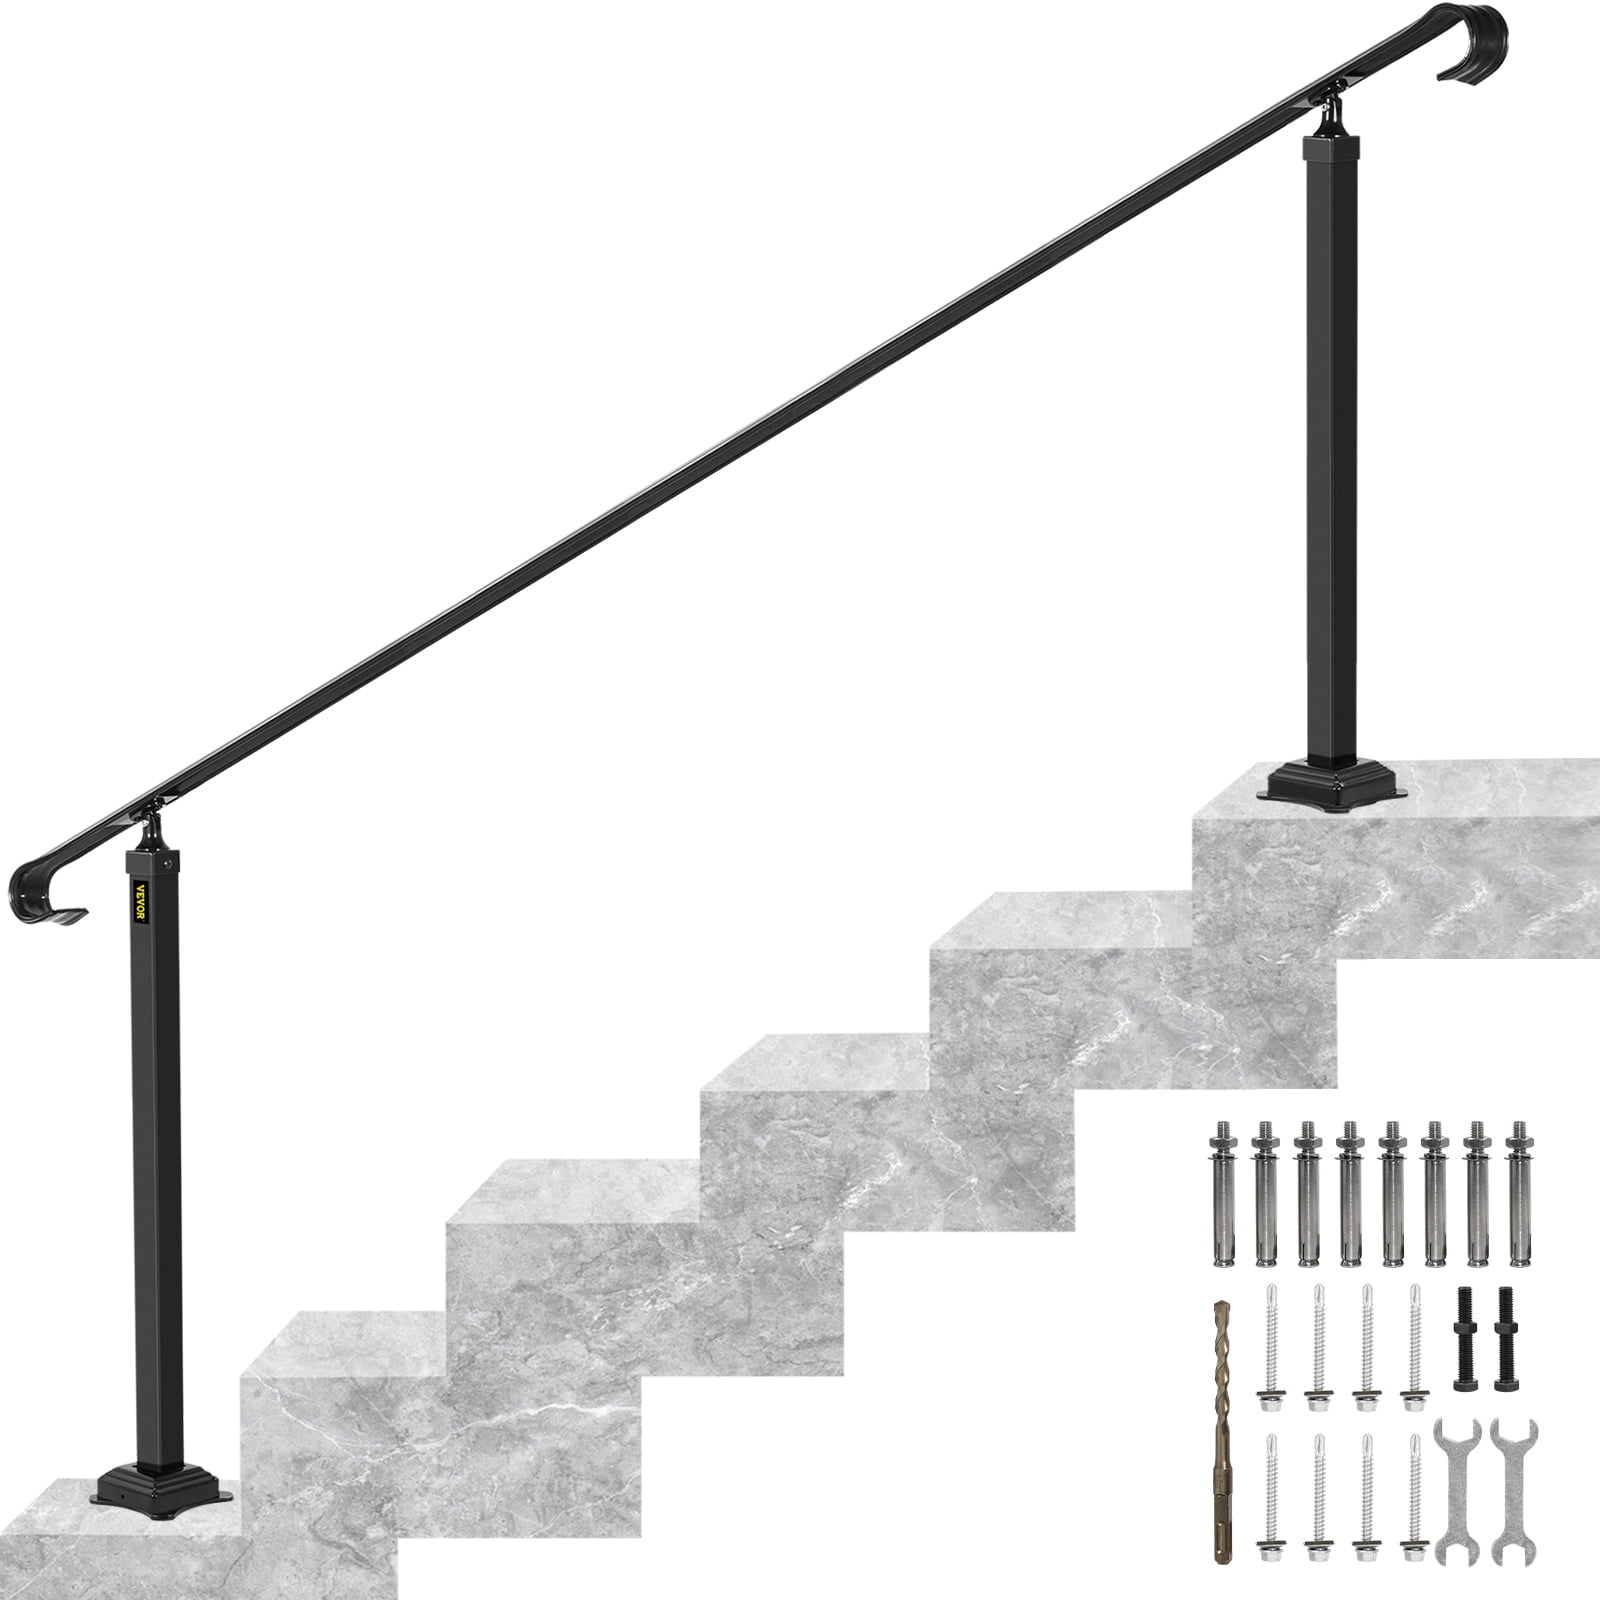 Vevorbrand Wrought Iron Handrail Fit 6 To 8 Steps Handrail For Outdoor